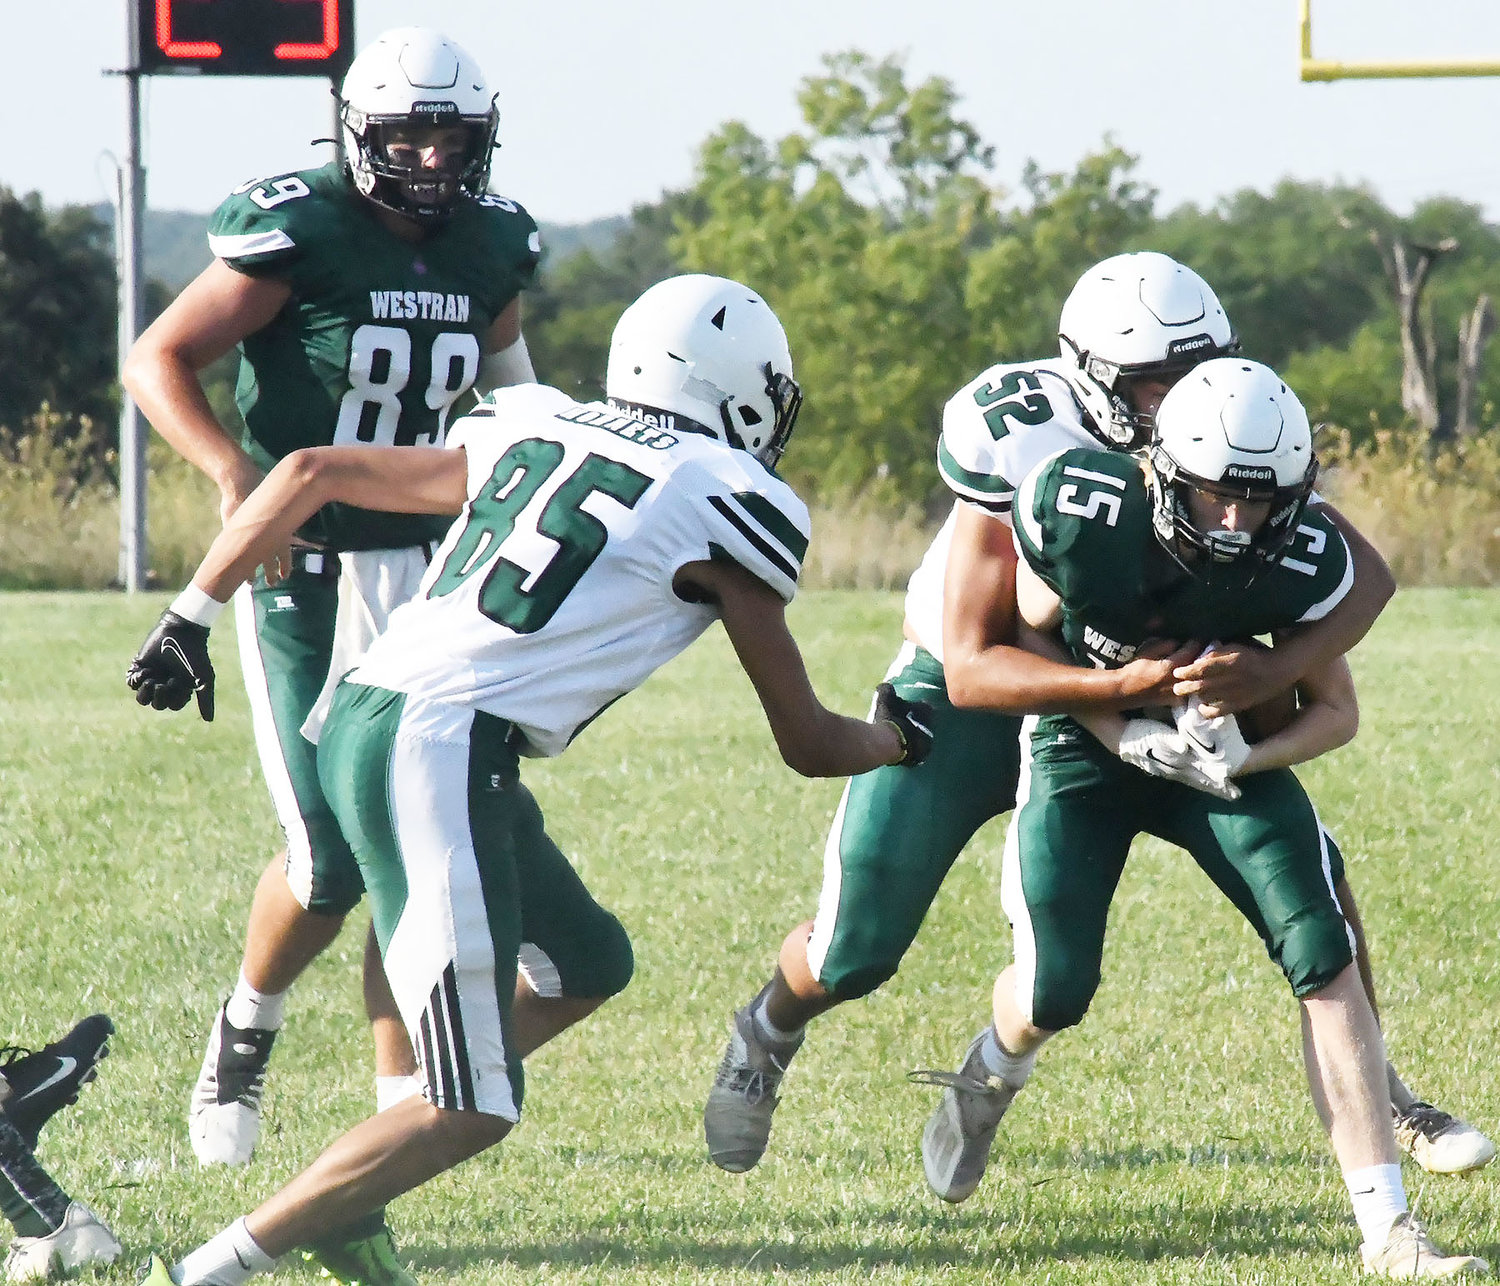 Westran High School’s Sam Harlan (15) is tackled by Blake Williams (52) during the green-and-white scrimmage on Saturday morning at the high school stadium. The Hornets’ will compete in a jamboree this Friday, Aug. 19. Read more on Page 7 of this edition of the Monitor-Index.